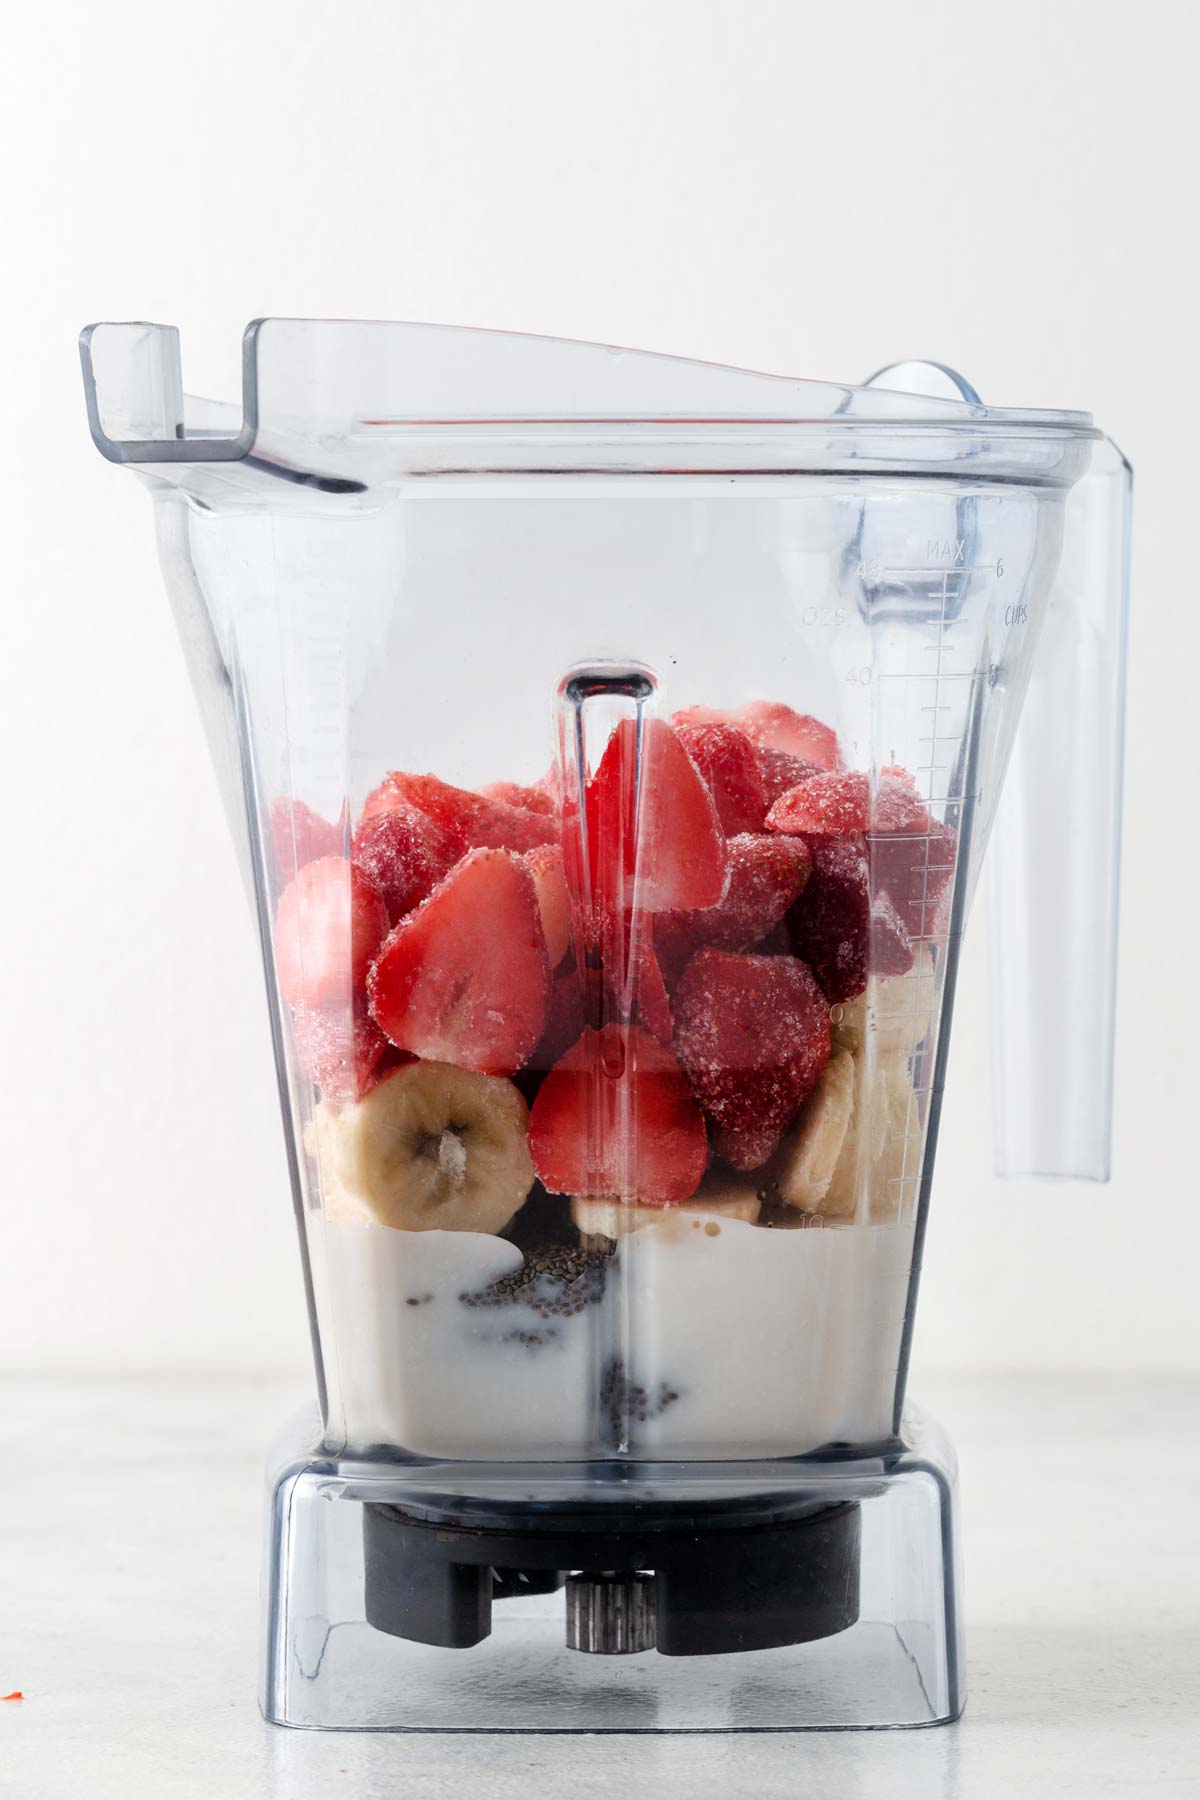 Ingredients for a strawberry banana smoothie bowl in a blender.